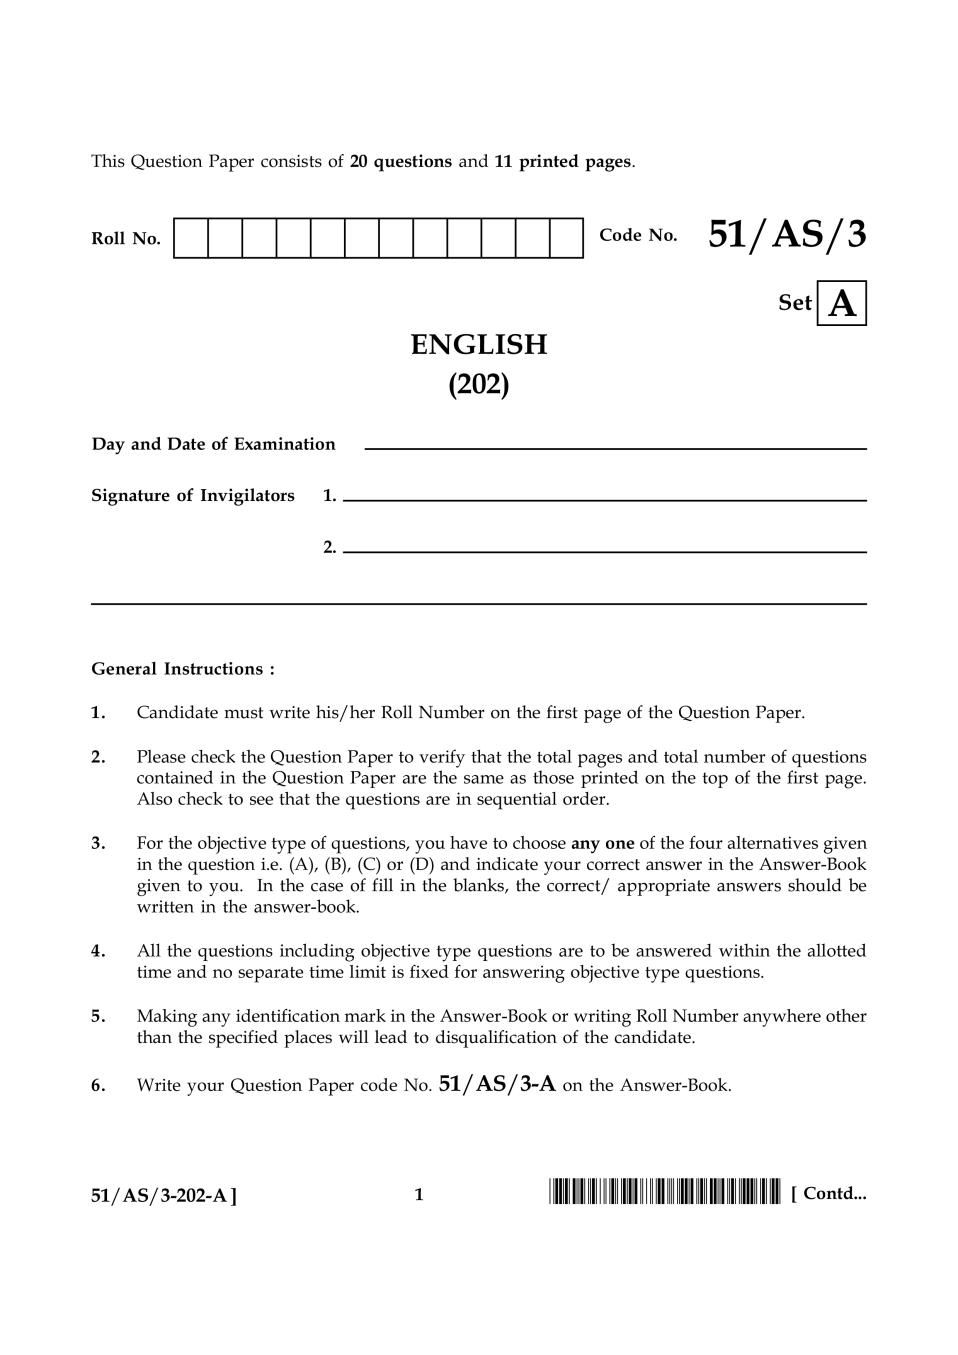 NIOS Class 10 Question Paper Oct 2015 - English - Page 1